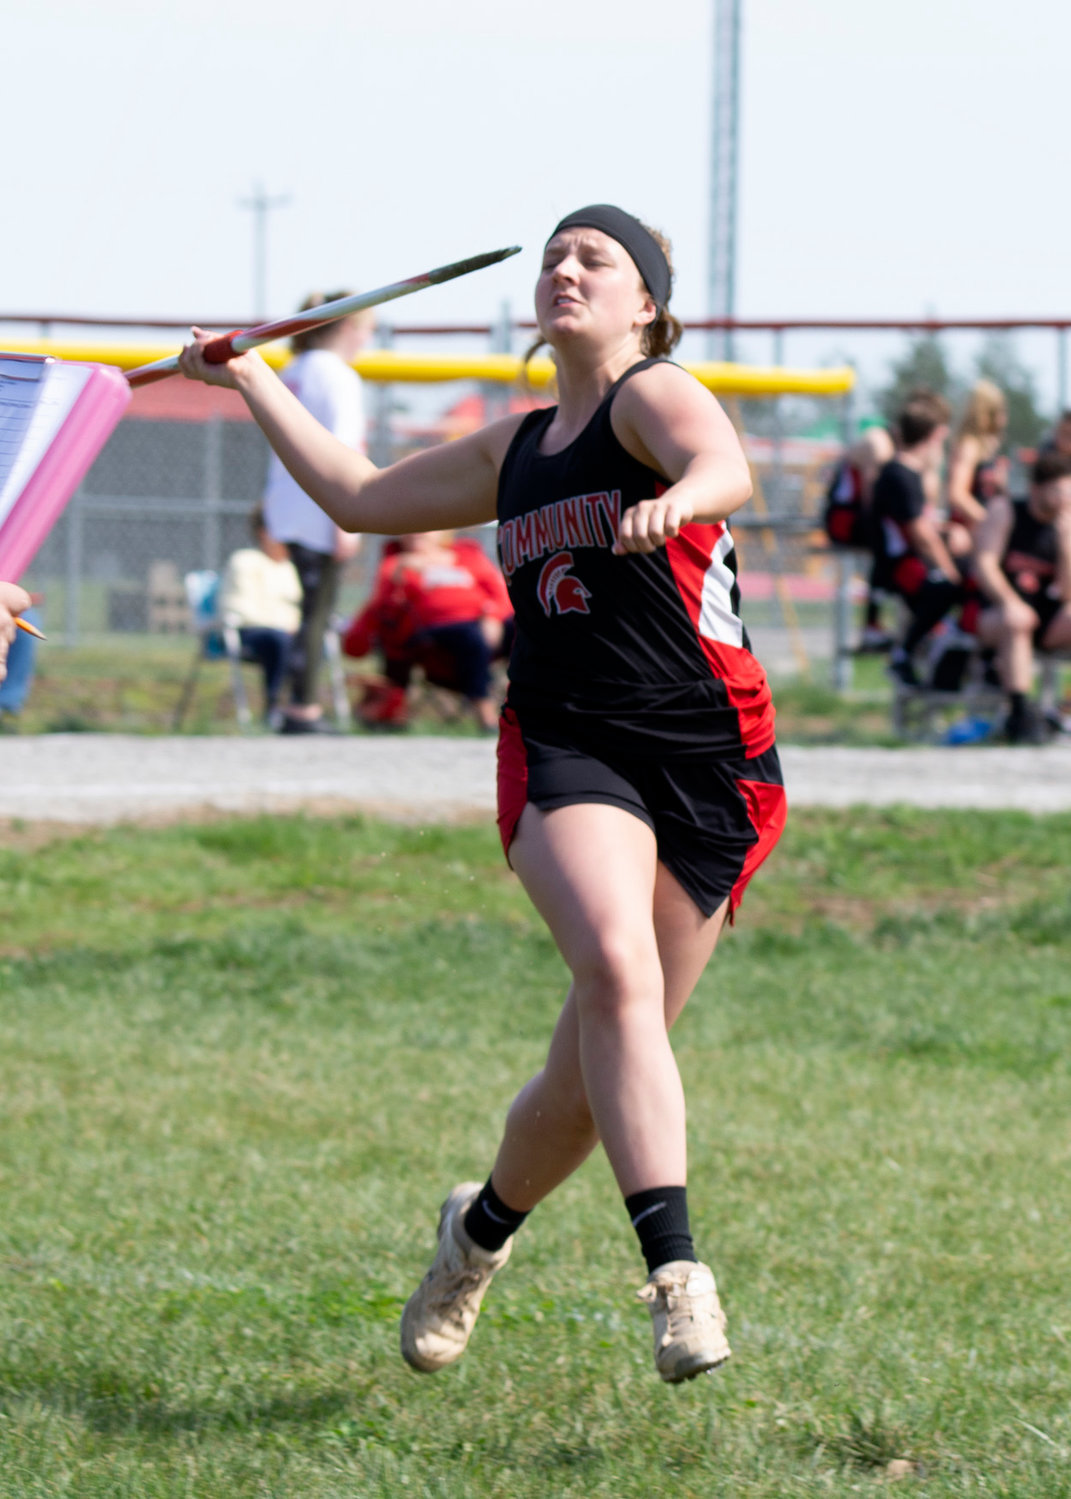 Emmi Johnson fires a javelin during Friday's track meet in Harrisburg. Johnson finished sixth in the event. [Leslie A. Meyer Photography]